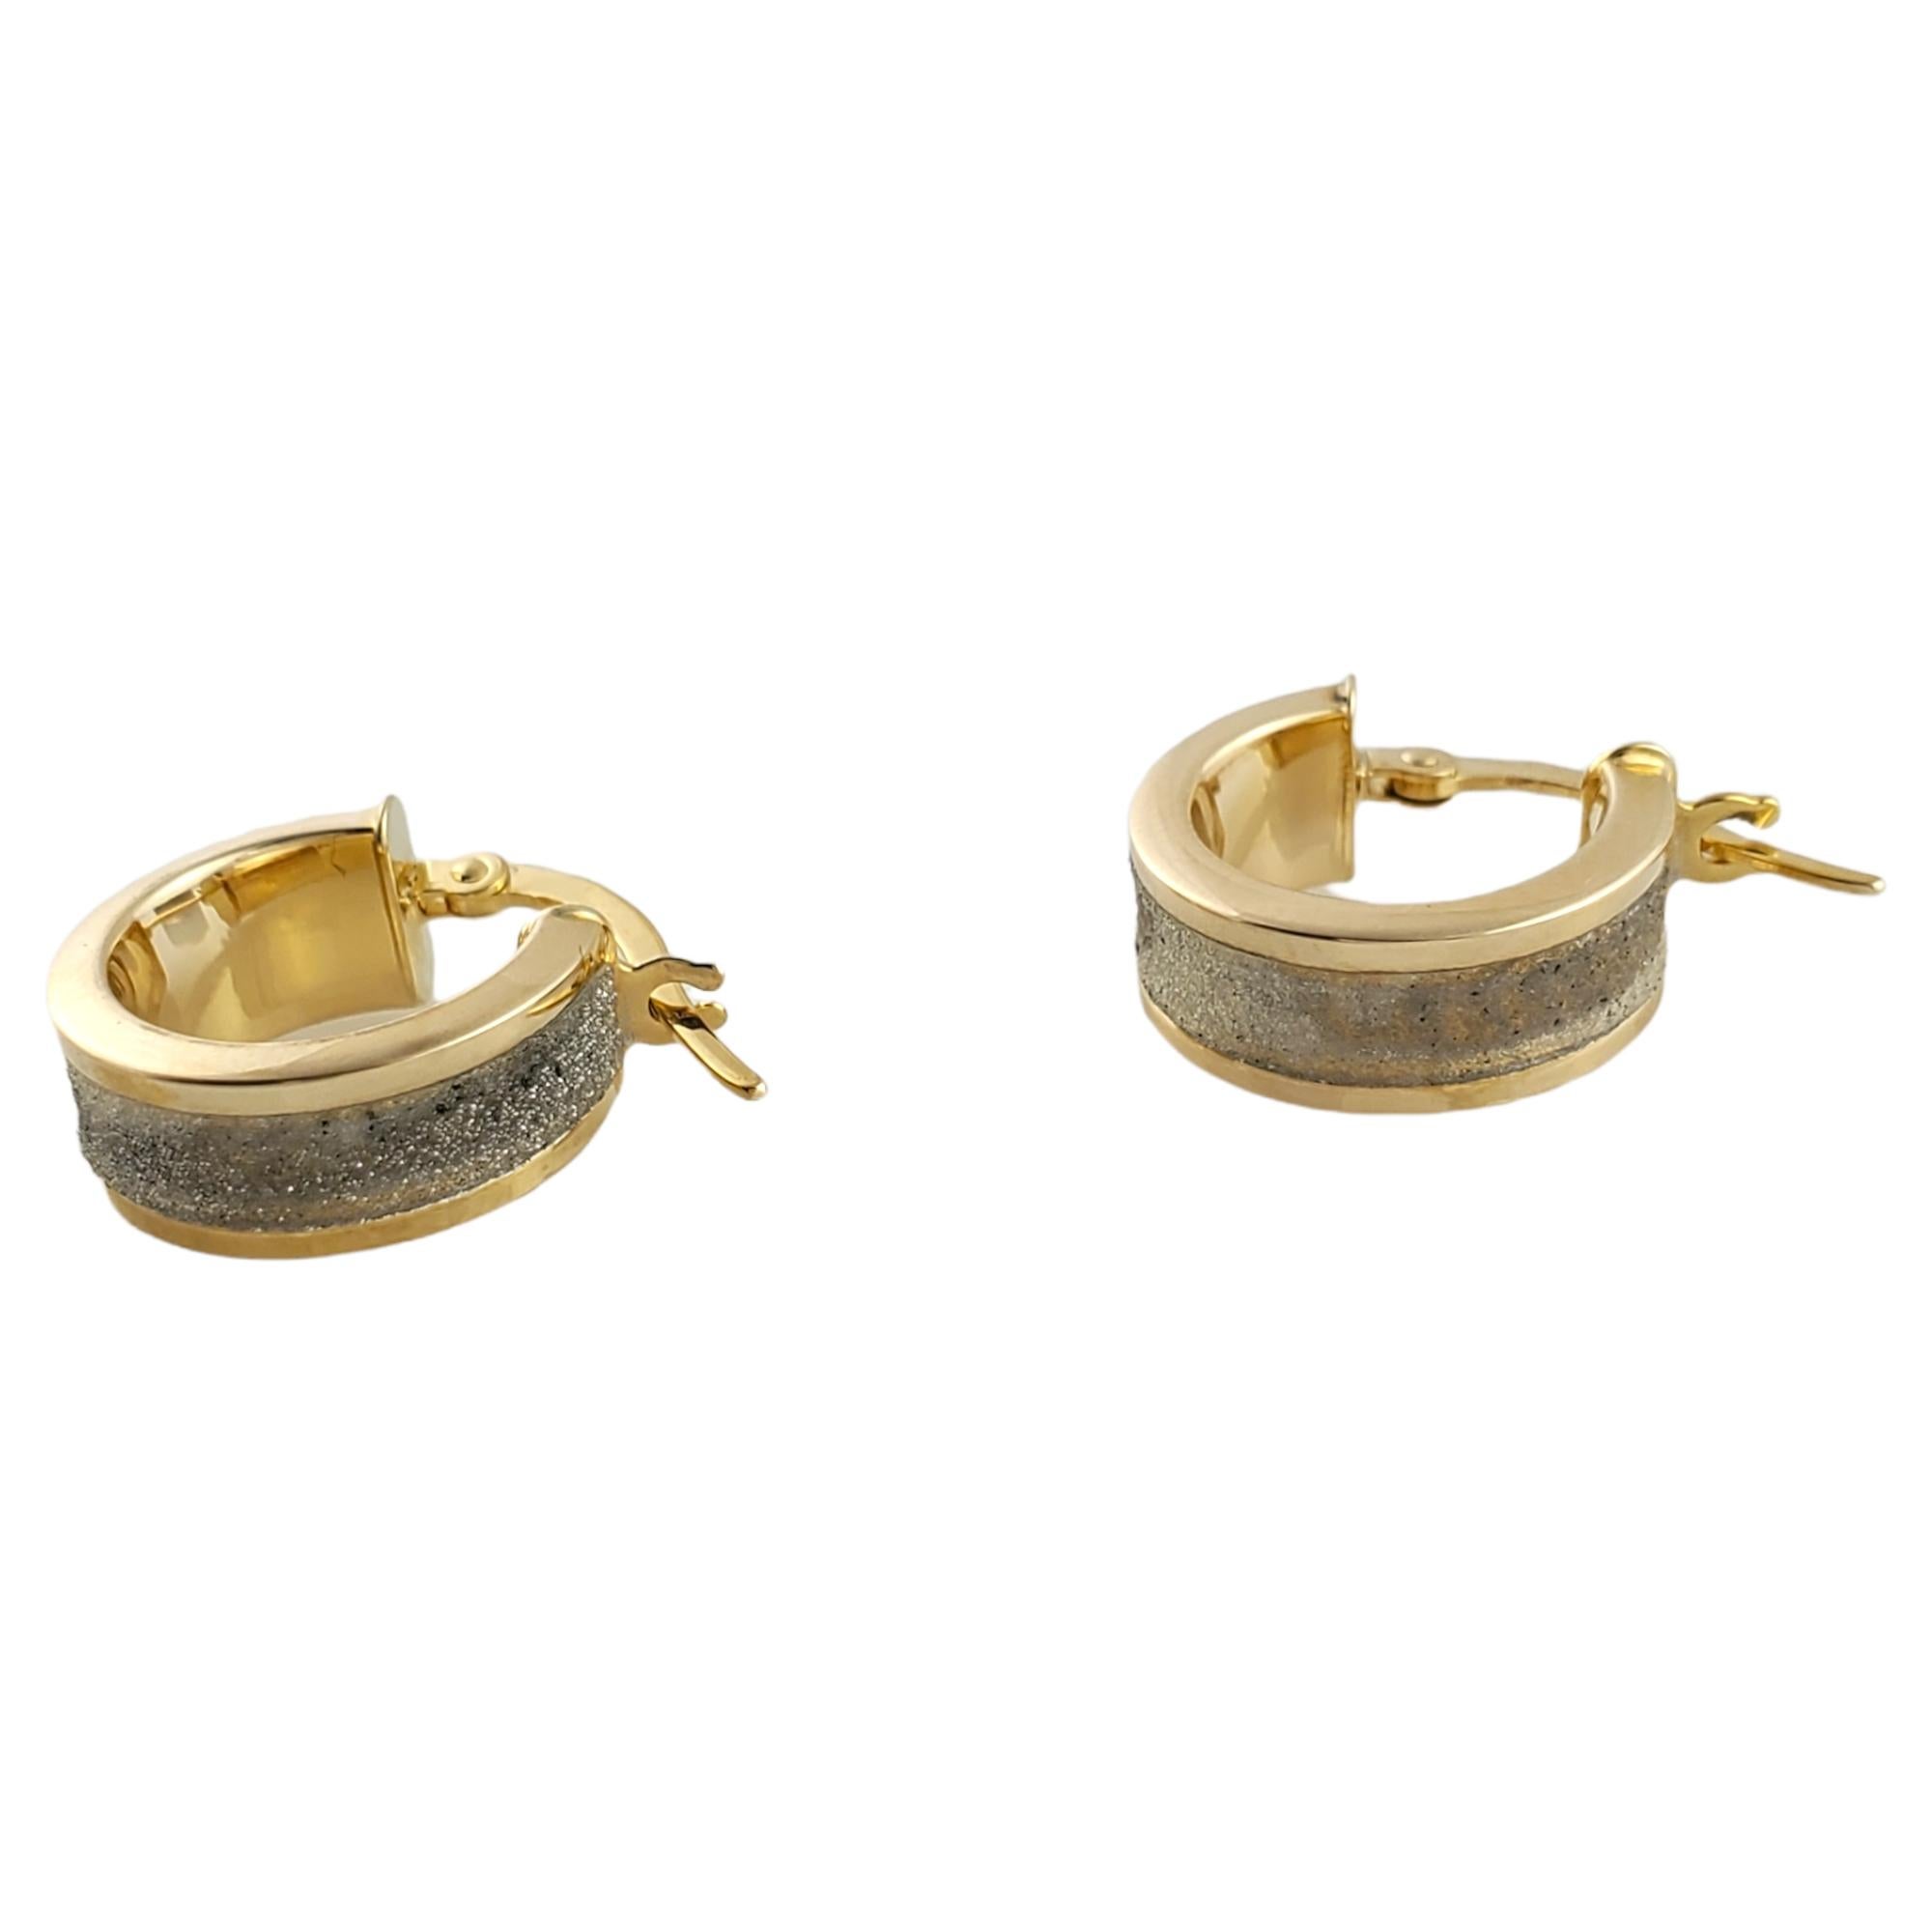 Vintage 14K Yellow Gold Sparkly Hoops

Breathtaking pair of 14K yellow gold hoops with beautiful sparkling detail.

Center is a 14K yellow gold textured area with sparkle.

Size: 16 mm X 18 mm

Weight: 2.0 g/ 1.2 dwt

Hallmark: 14KT Italy

Very good